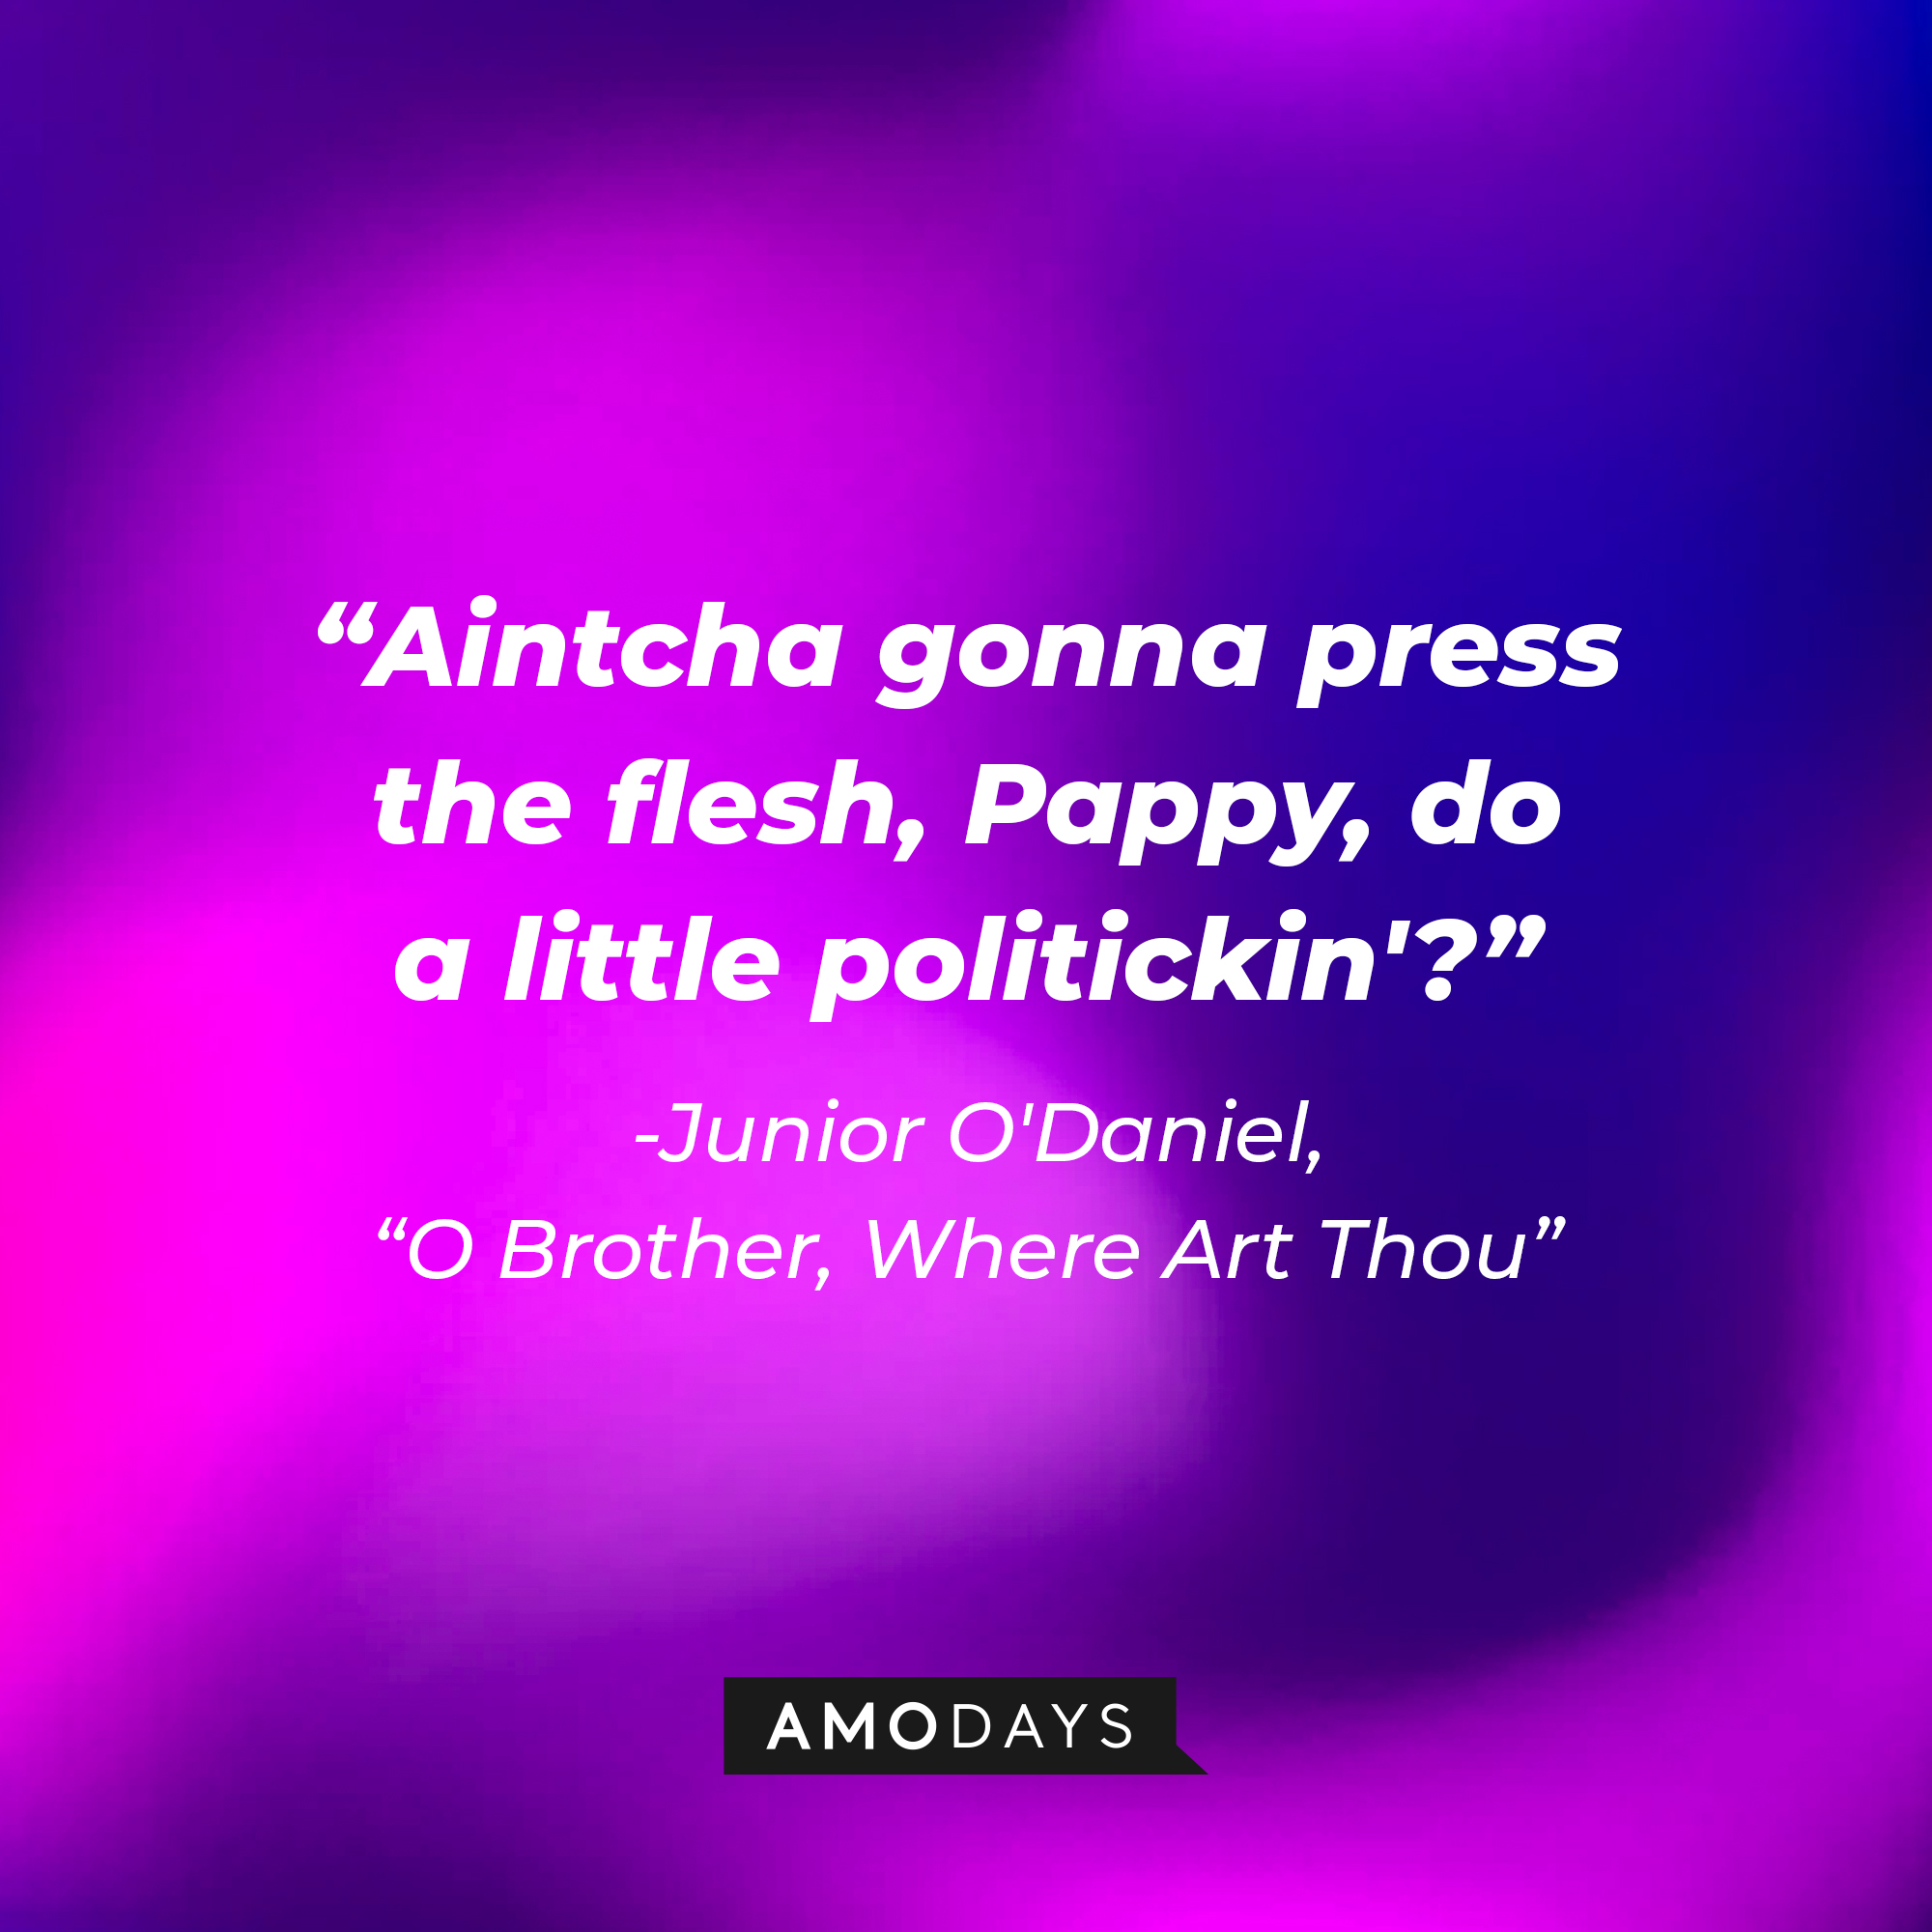 Junior O'Daniel's quote in "O Brother, Where Art Thou:" "Aintcha gonna press the flesh, Pappy, do a little politickin'?" | Source: AmoDays